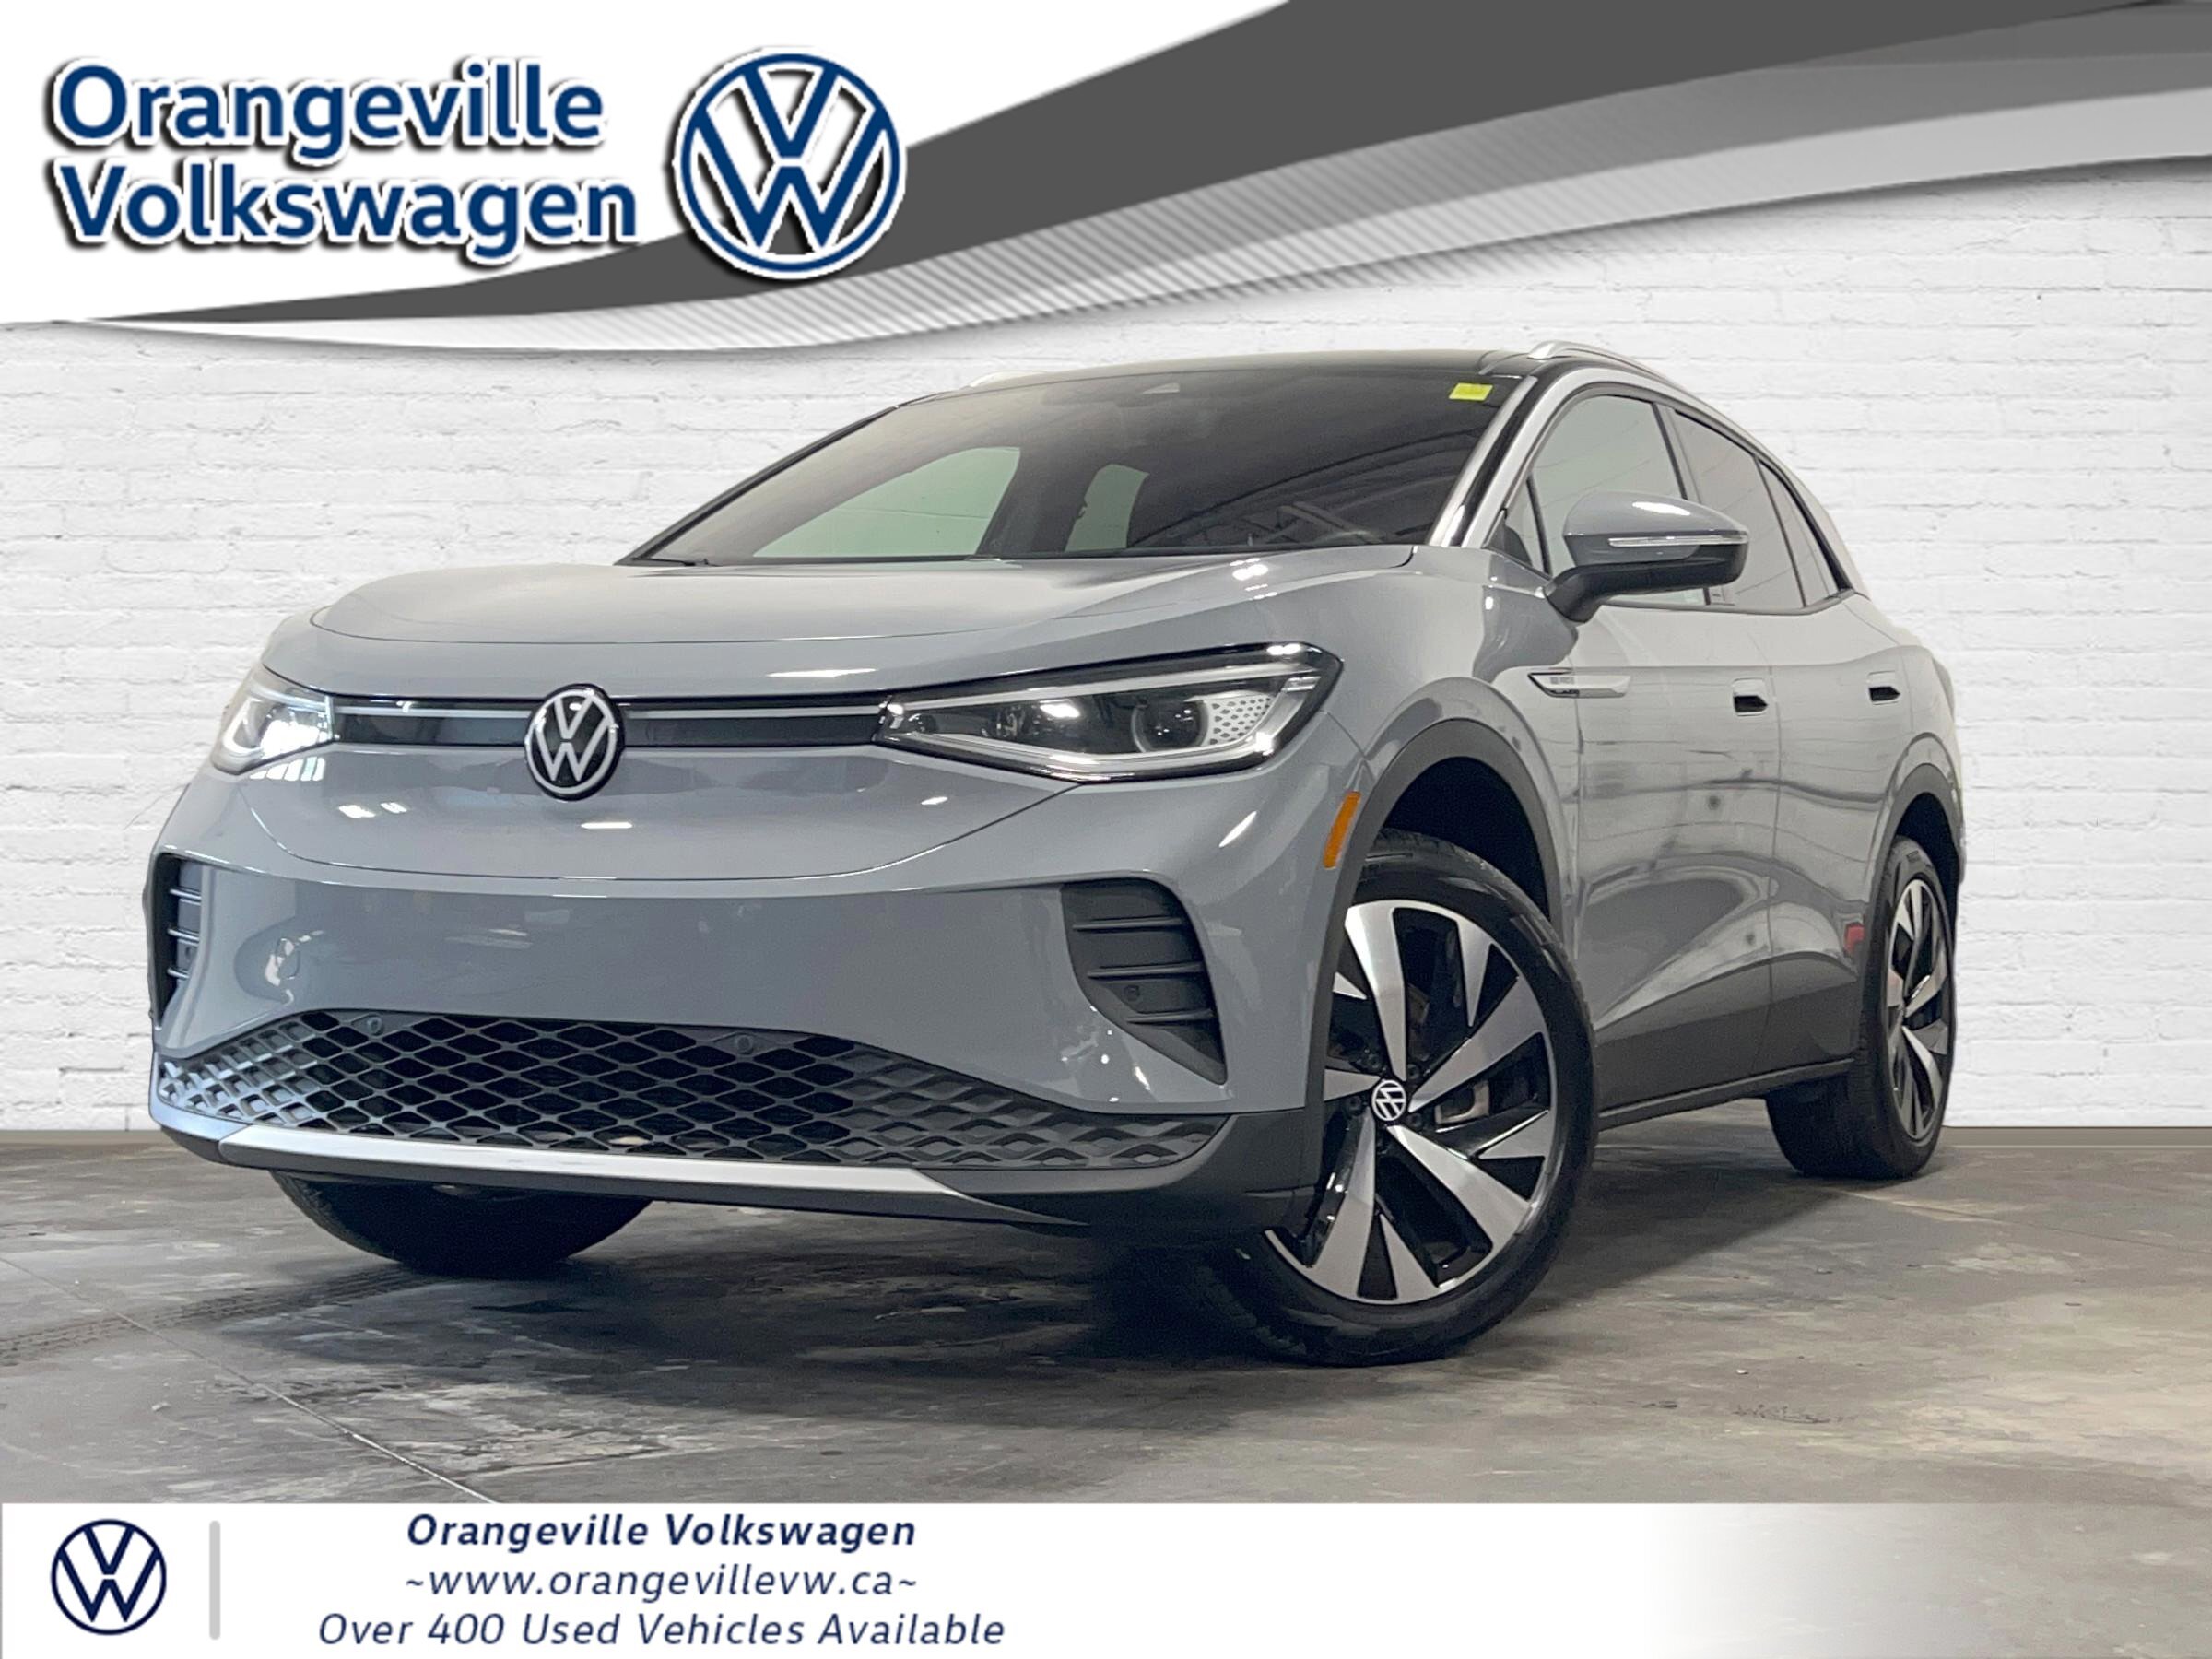 2022 Volkswagen ID.4 ProFULLY ELECTRIC, STATEMENT PACKAGE, CLEAN CARFAX